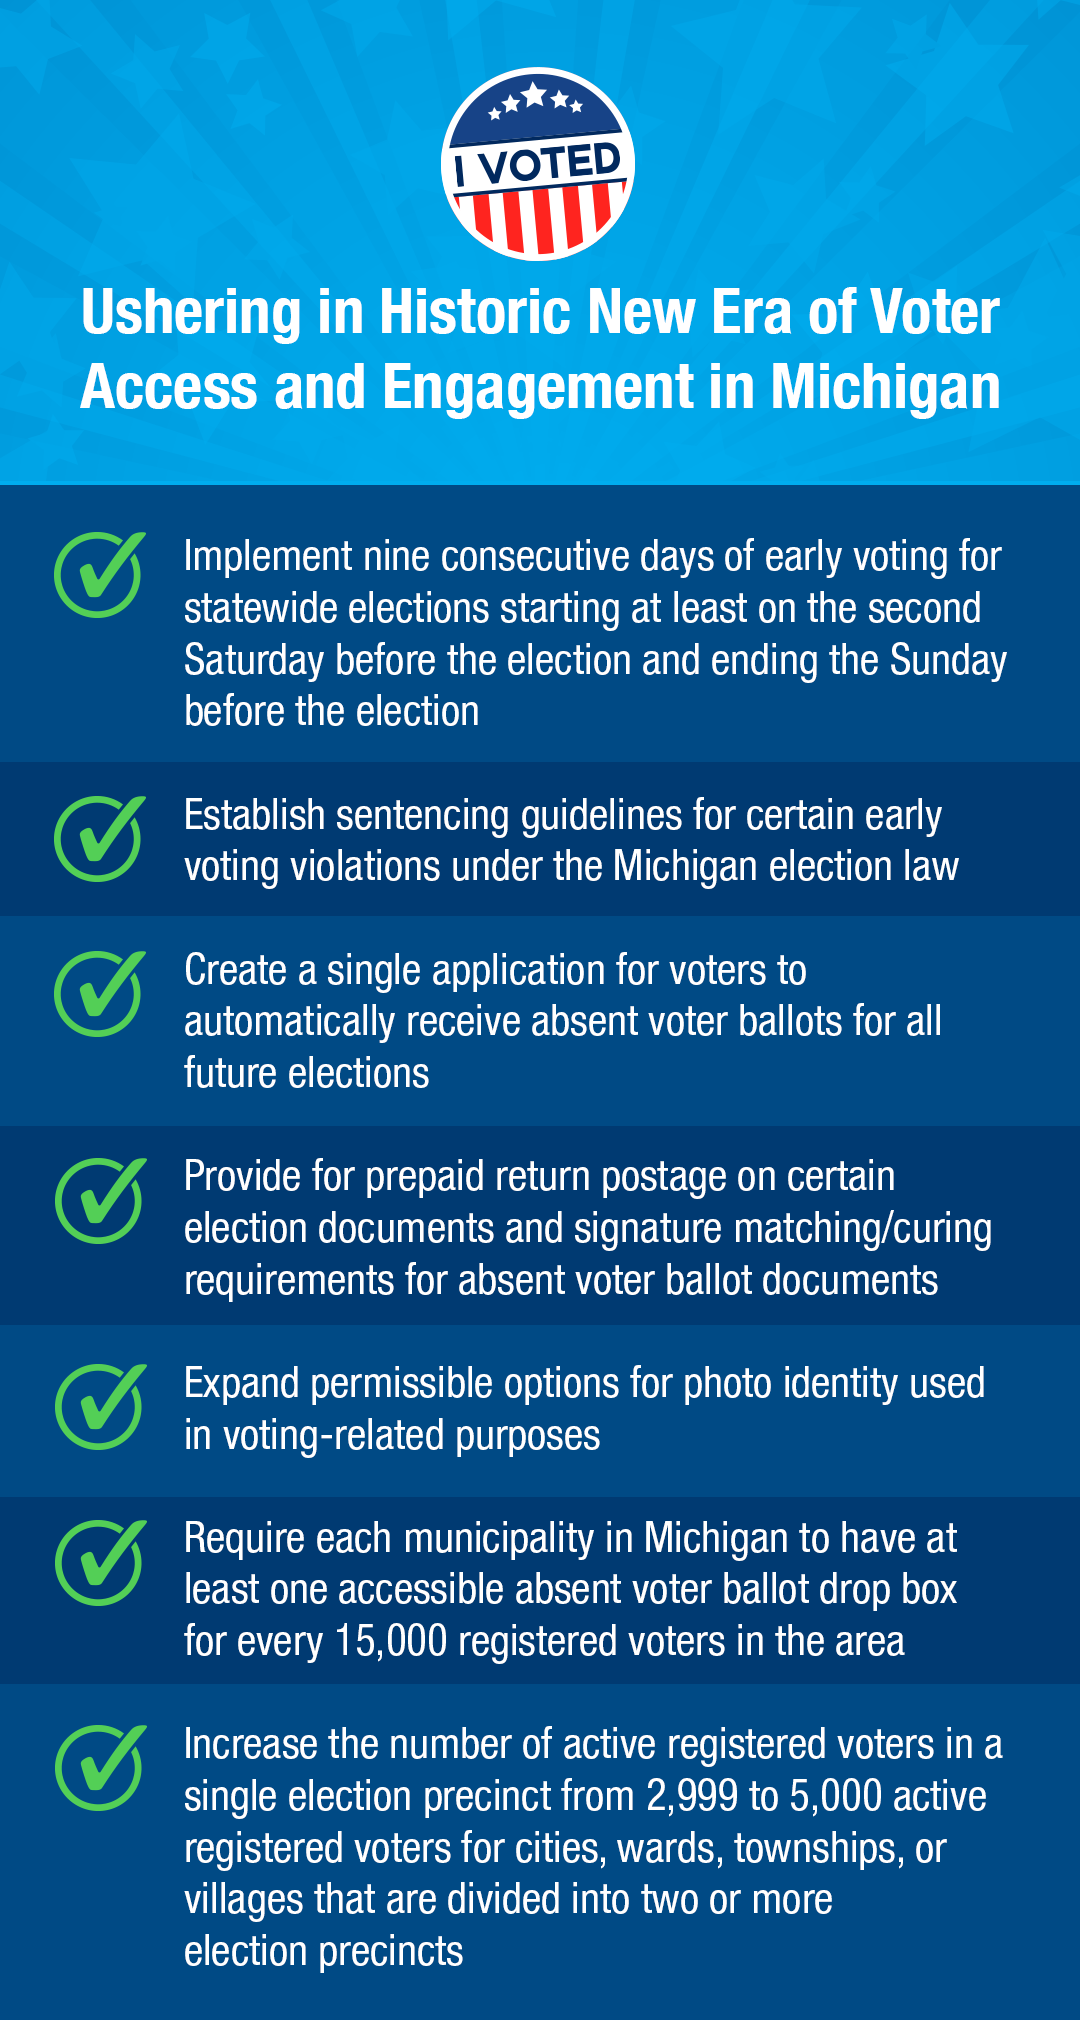 Graphic with varying shades of blue and an "I Voted" sticker. The title reads: Ushering in Historic New Era of Voter Access and Engagement in Michigan. The graphic lists: Implement nine consecutive days of early voting for statewide elections starting at least on the second Saturday before the election and ending the Sunday before the election. Establish sentencing guidelines for certain early voting violations under the Michigan election law. Create a single application for voters to automatically receive absent voter ballots for all future elections. Provide for prepaid return postage on certain election documents and signature matching/curing requirements for absent voter ballot documents. Expand permissible options for photo identity used in voting-related purposes Require each municipality in Michigan to have at least one accessible absent voter ballot drop box for every 15,000 registered voters in the area. Increase the number of active registered voters in a single election precinct from 2,999 to 5,0000 active registered voters for cities, wards, townships, or villages that are divided into two or more election precincts. September 15, 2023 at 5:05 PM